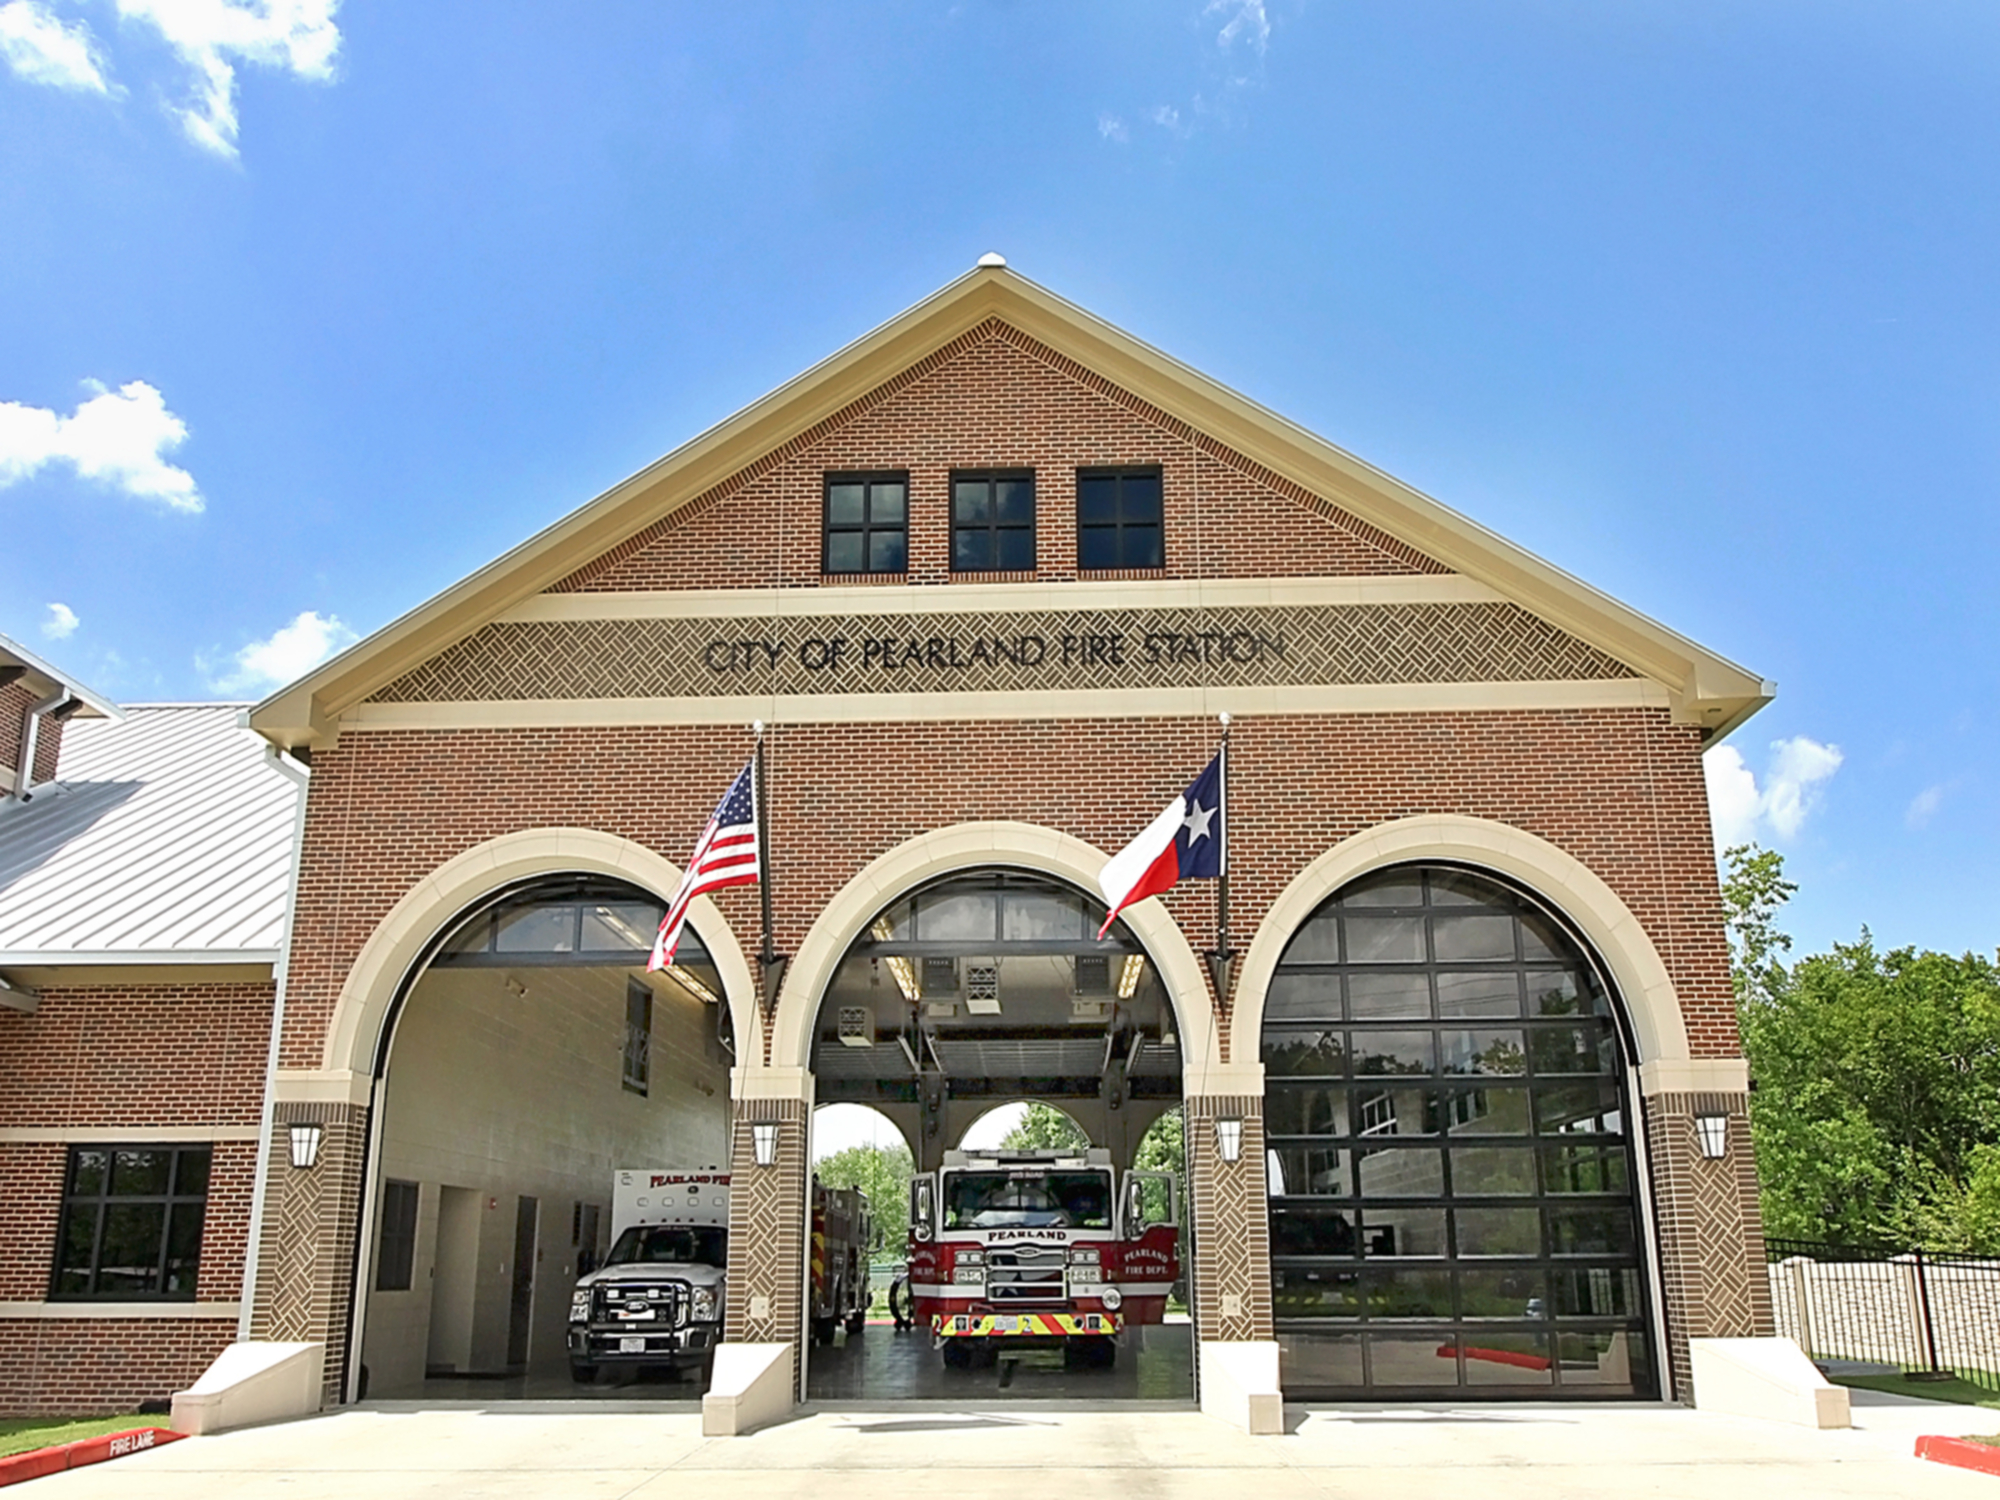 Haris County ESD 1 Fire Station